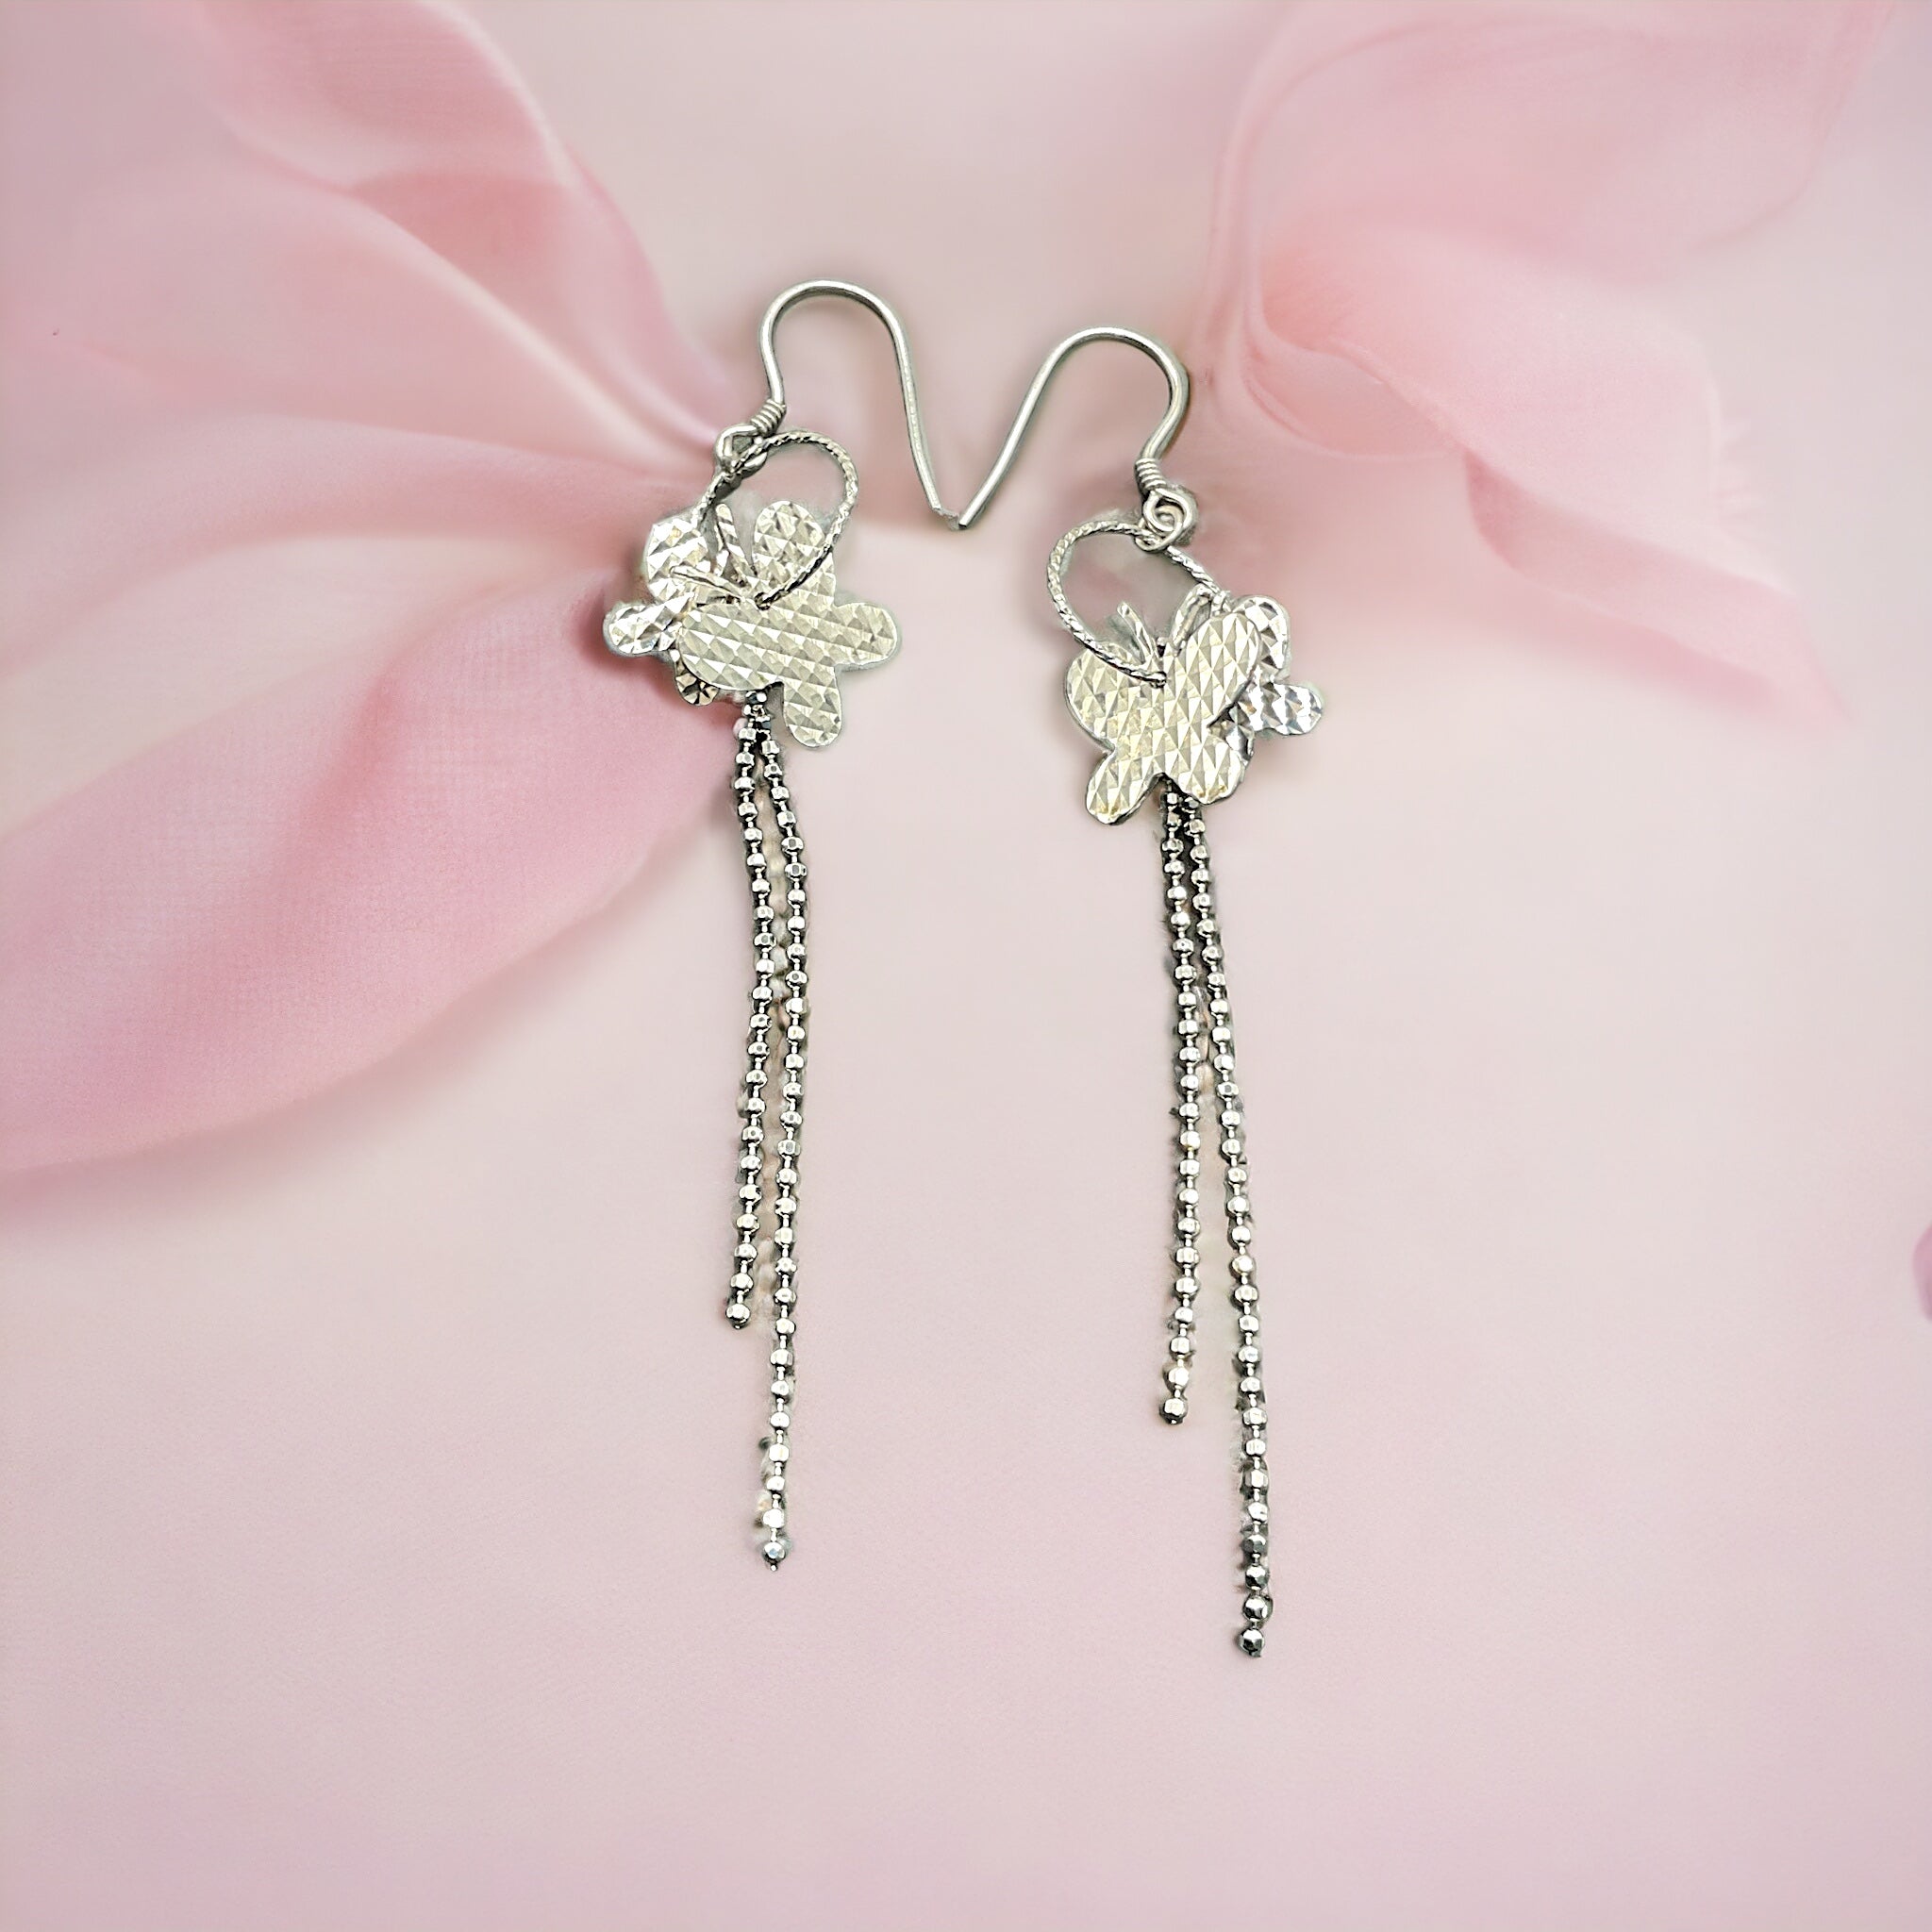 a pair of earrings with a flower and a chain hanging from it